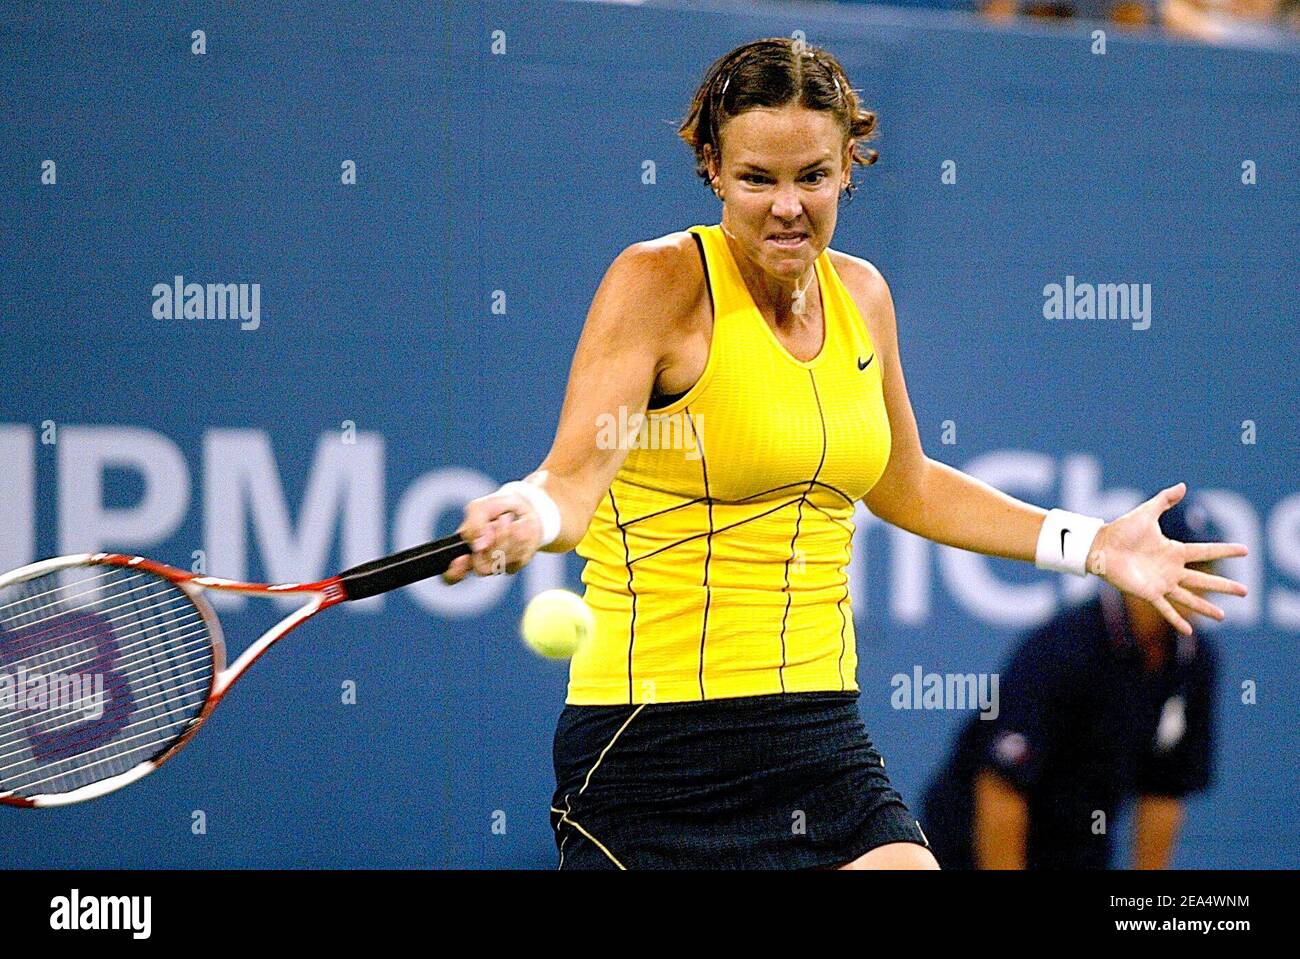 Lindsay Davenport (USA) competes against Na Li (CHN) during the second day of competition at the 2005 US Open tennis tournament in Flushing Meadows, New York on August 30, 2005. Photo by William Gratz/CAMELEON/ABACAPRESS.COM Stock Photo